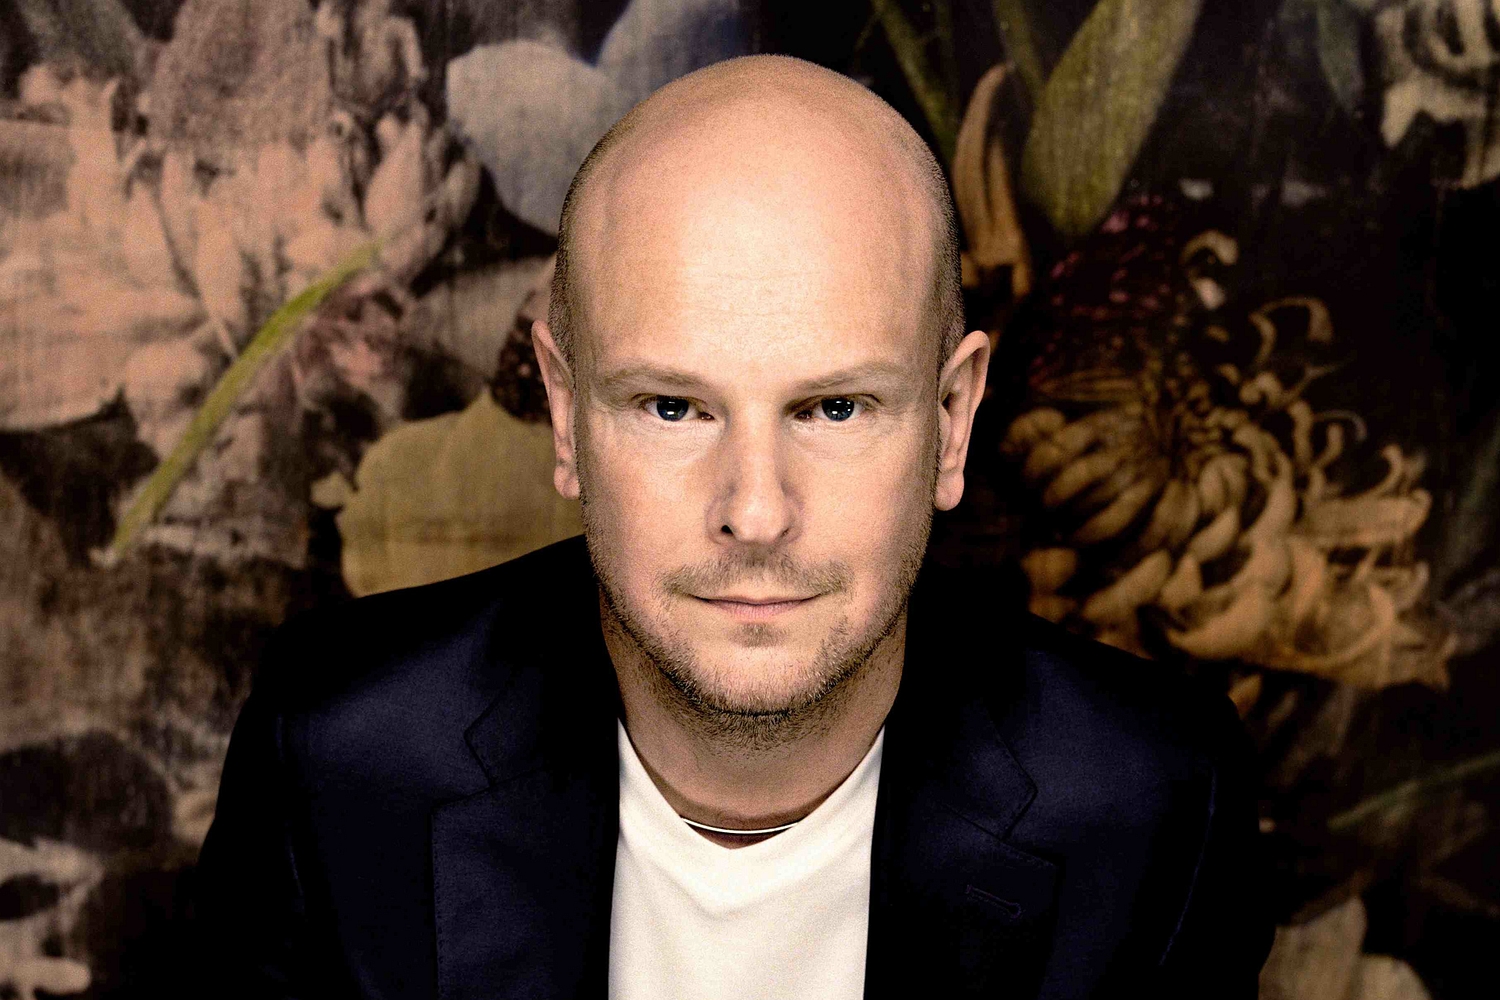 Philip Selway previews new album with ‘It Will End In Tears’